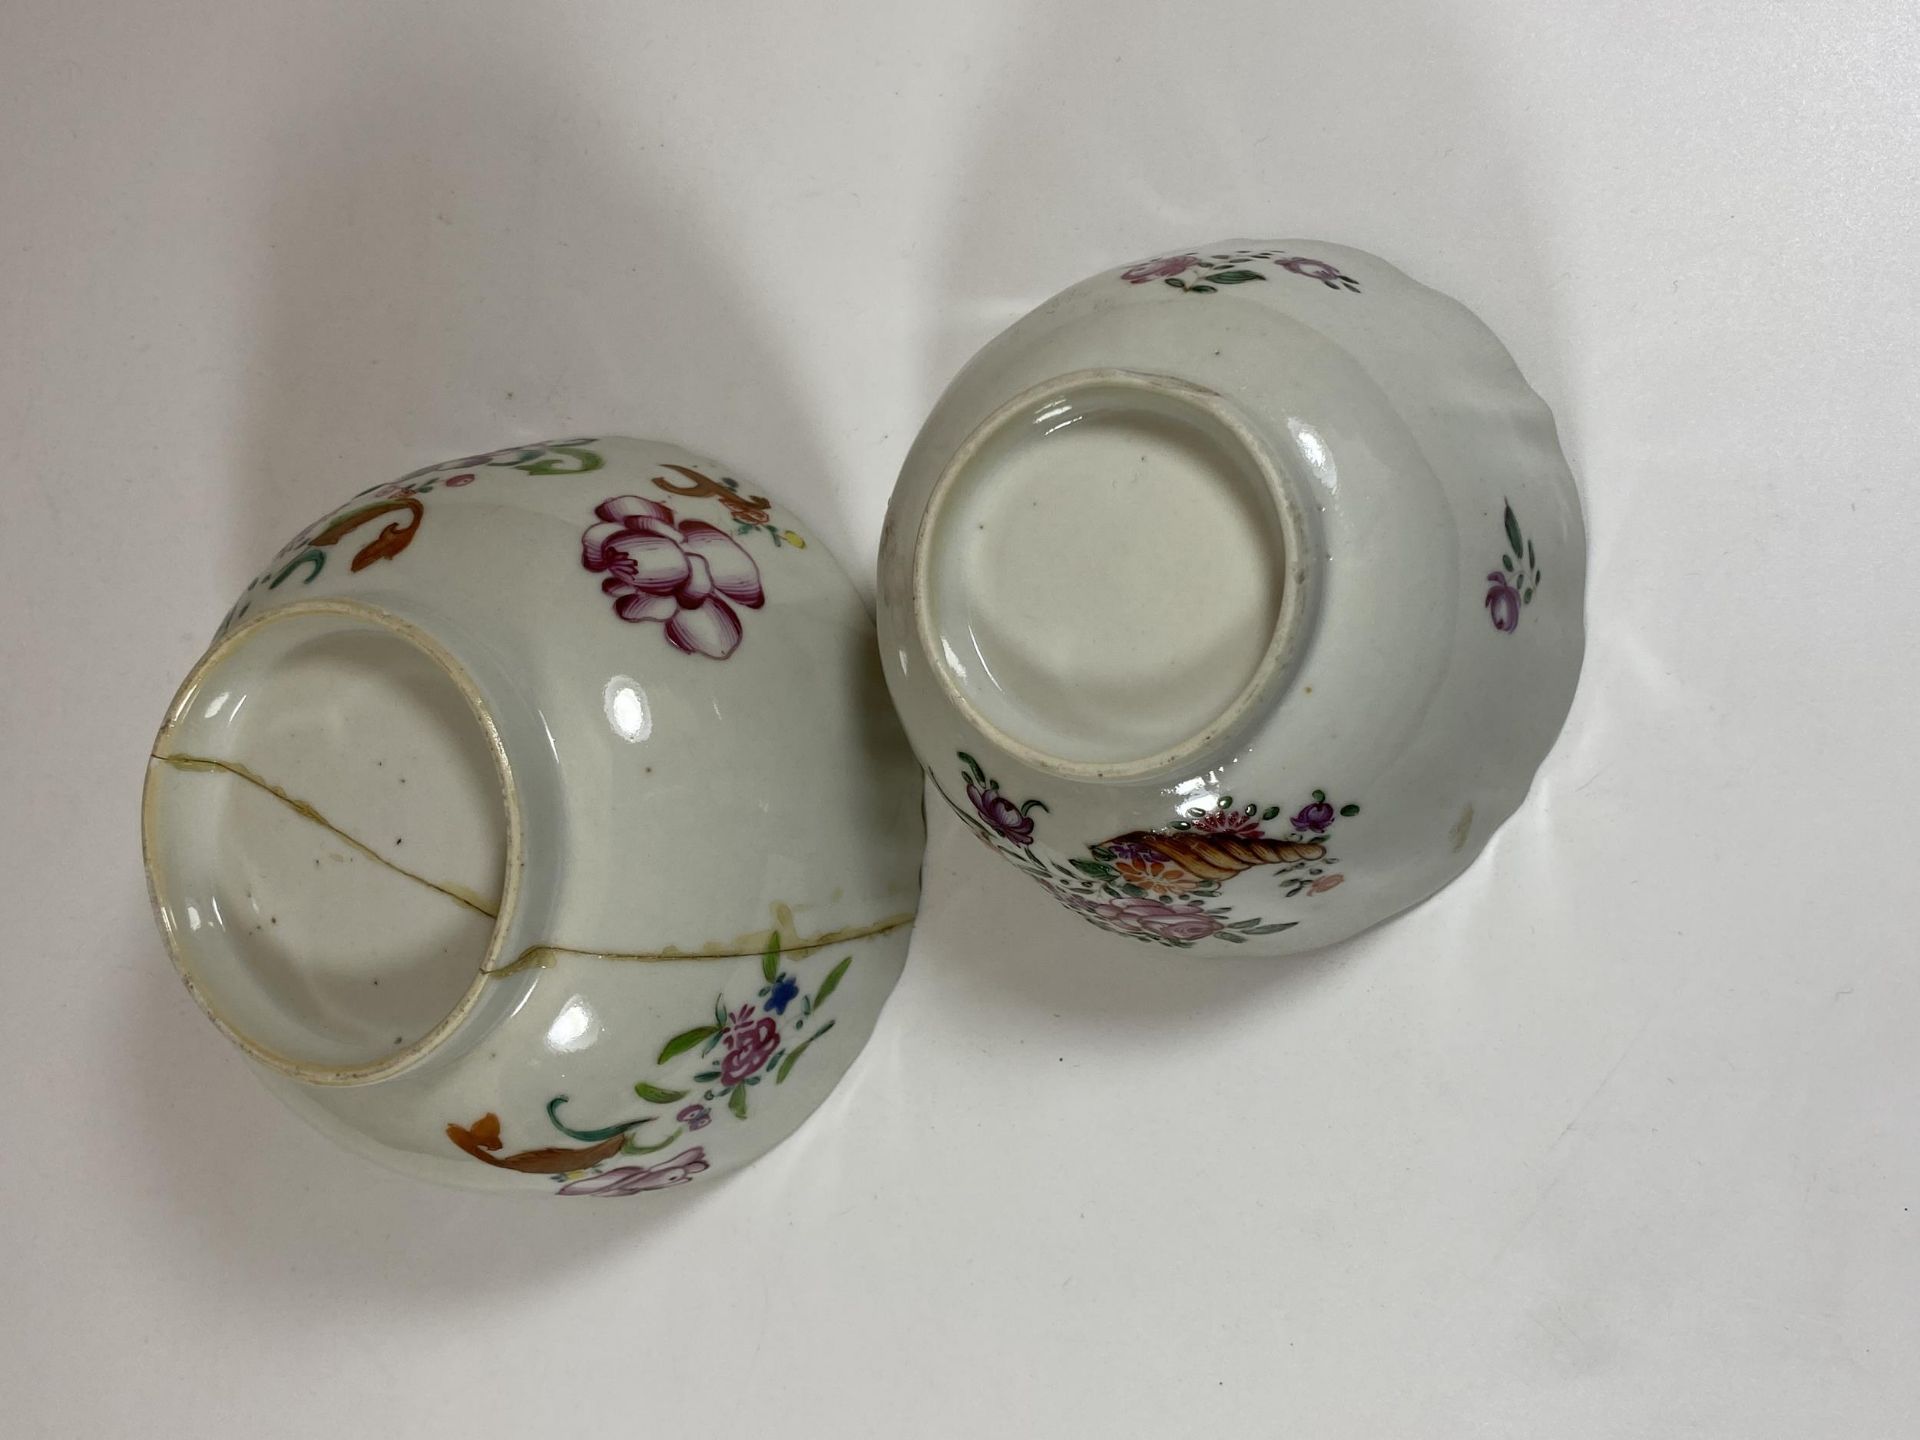 TWO 19TH CENTURY CHINESE FAMILLE ROSE BOWLS, LARGEST DIAMETER 14CM - Image 4 of 5